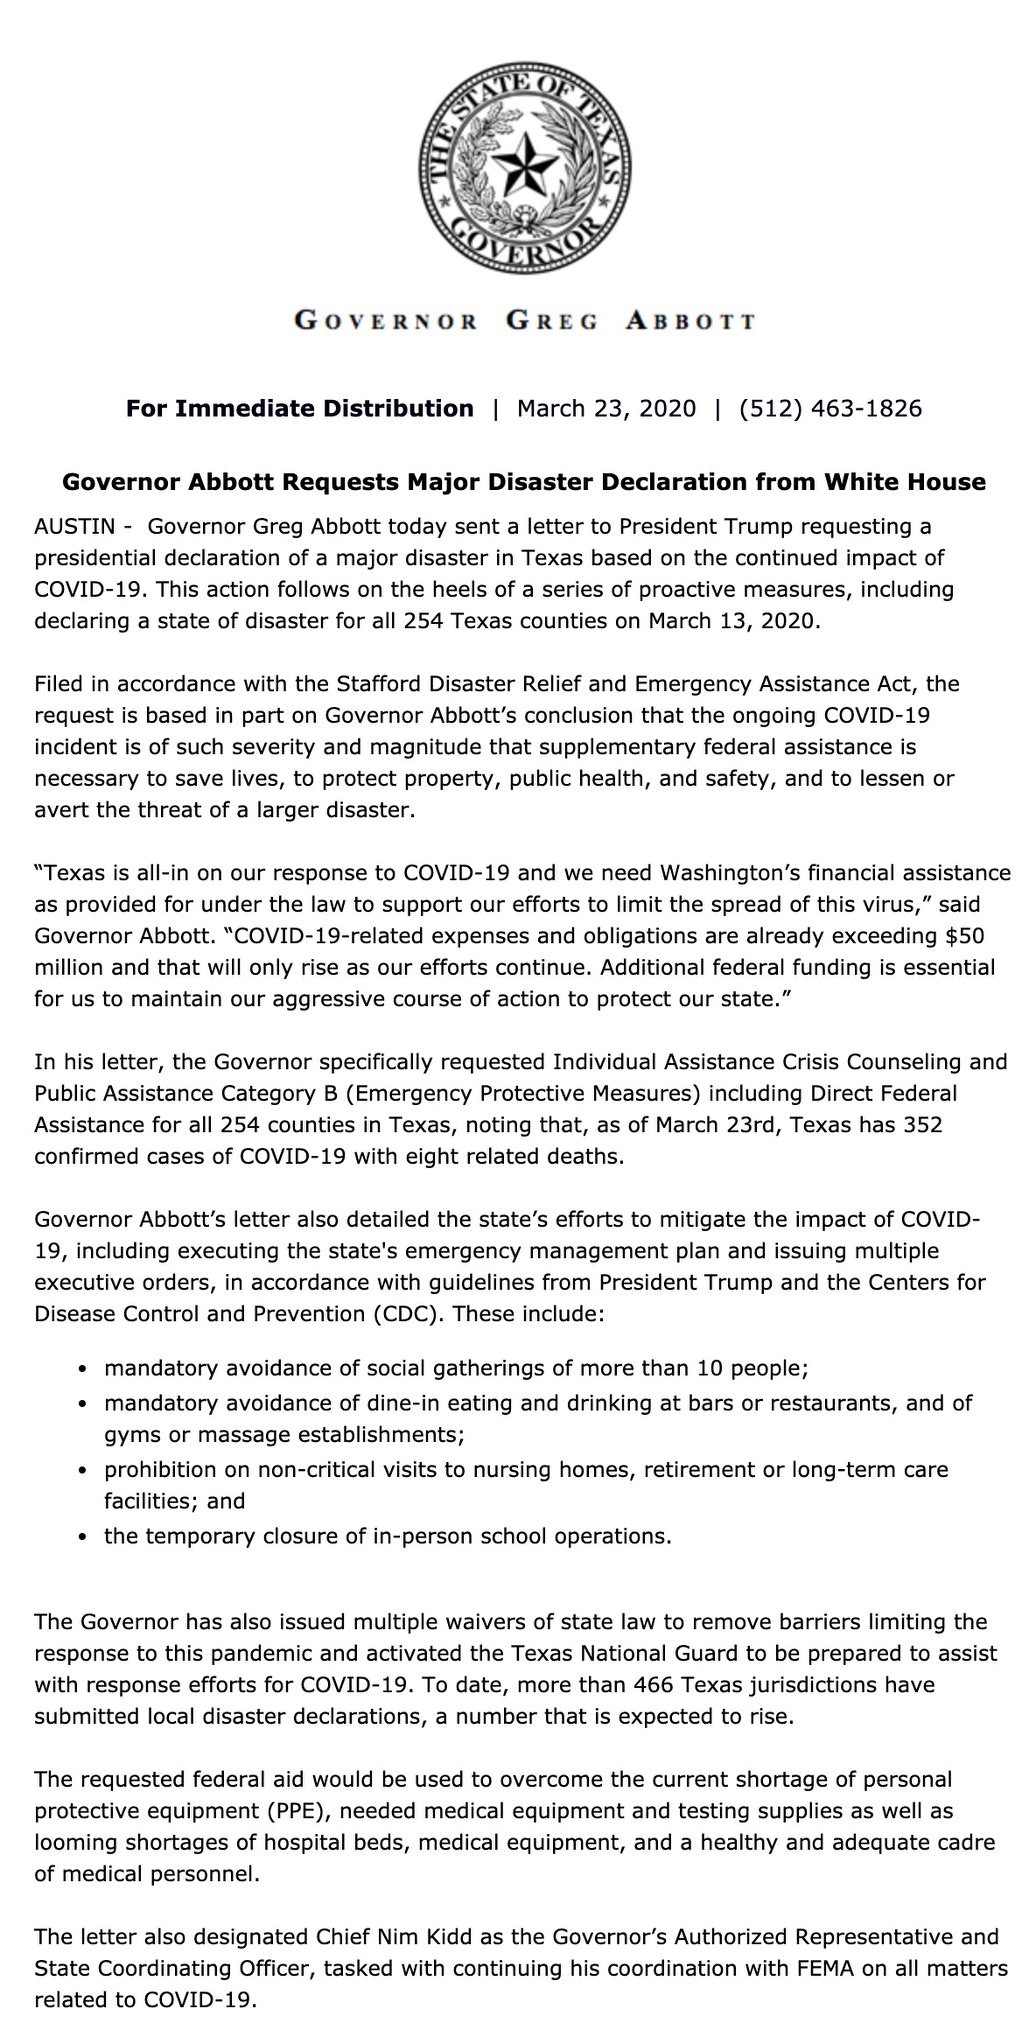 Governor Abbott Requests Major Disaster Declaration From White House Myparistexas